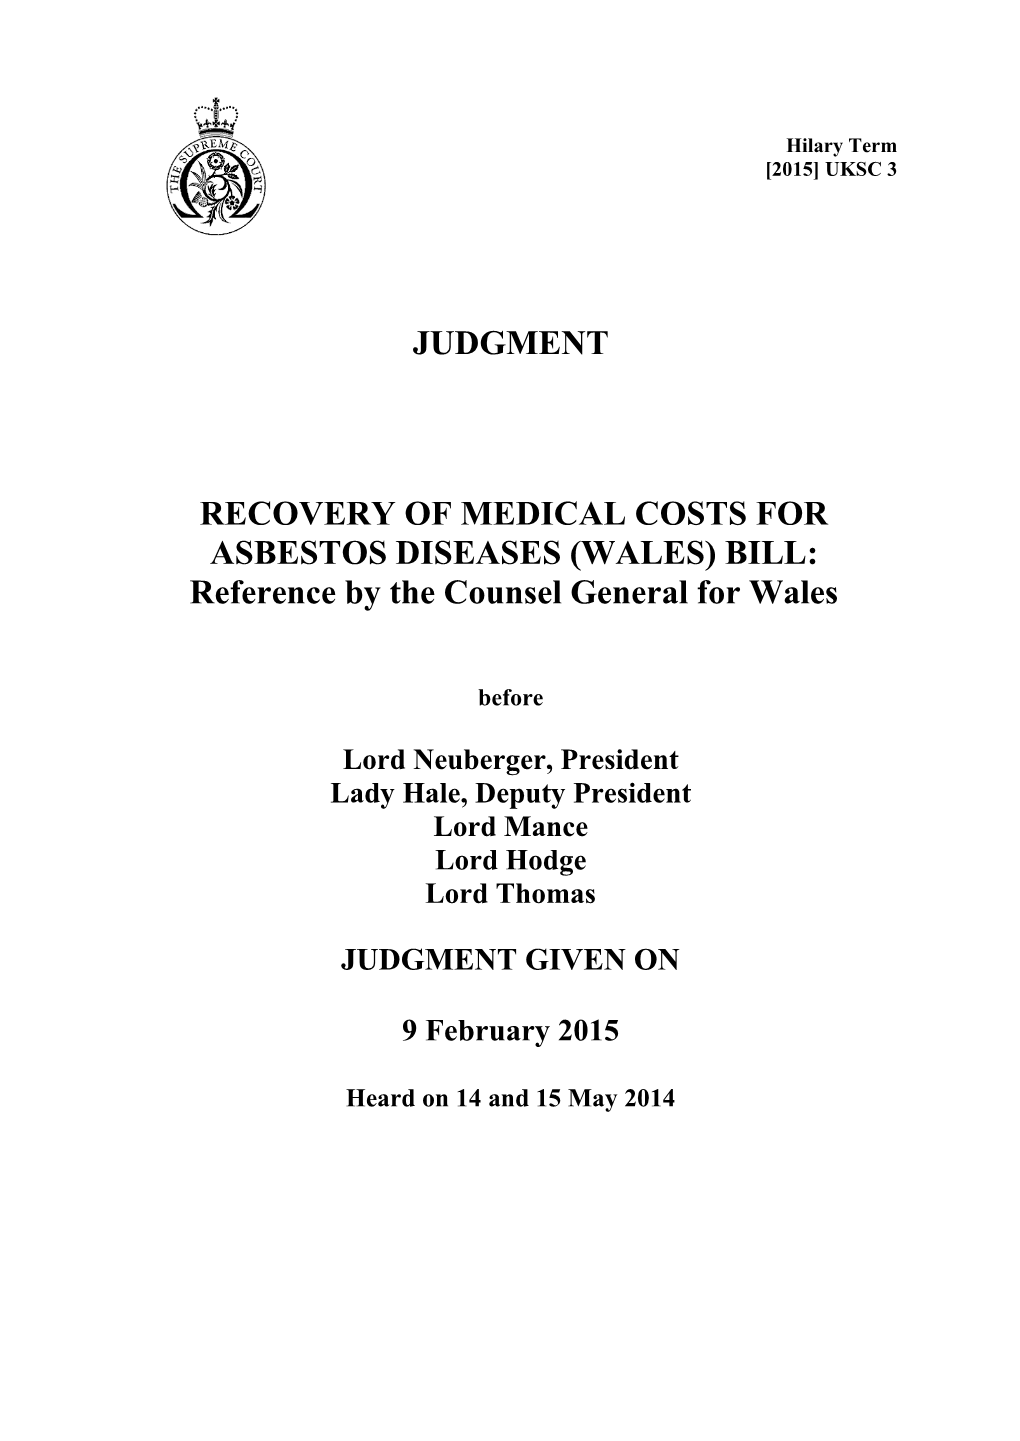 RECOVERY of MEDICAL COSTS for ASBESTOS DISEASES (WALES) BILL: Reference by the Counsel General for Wales